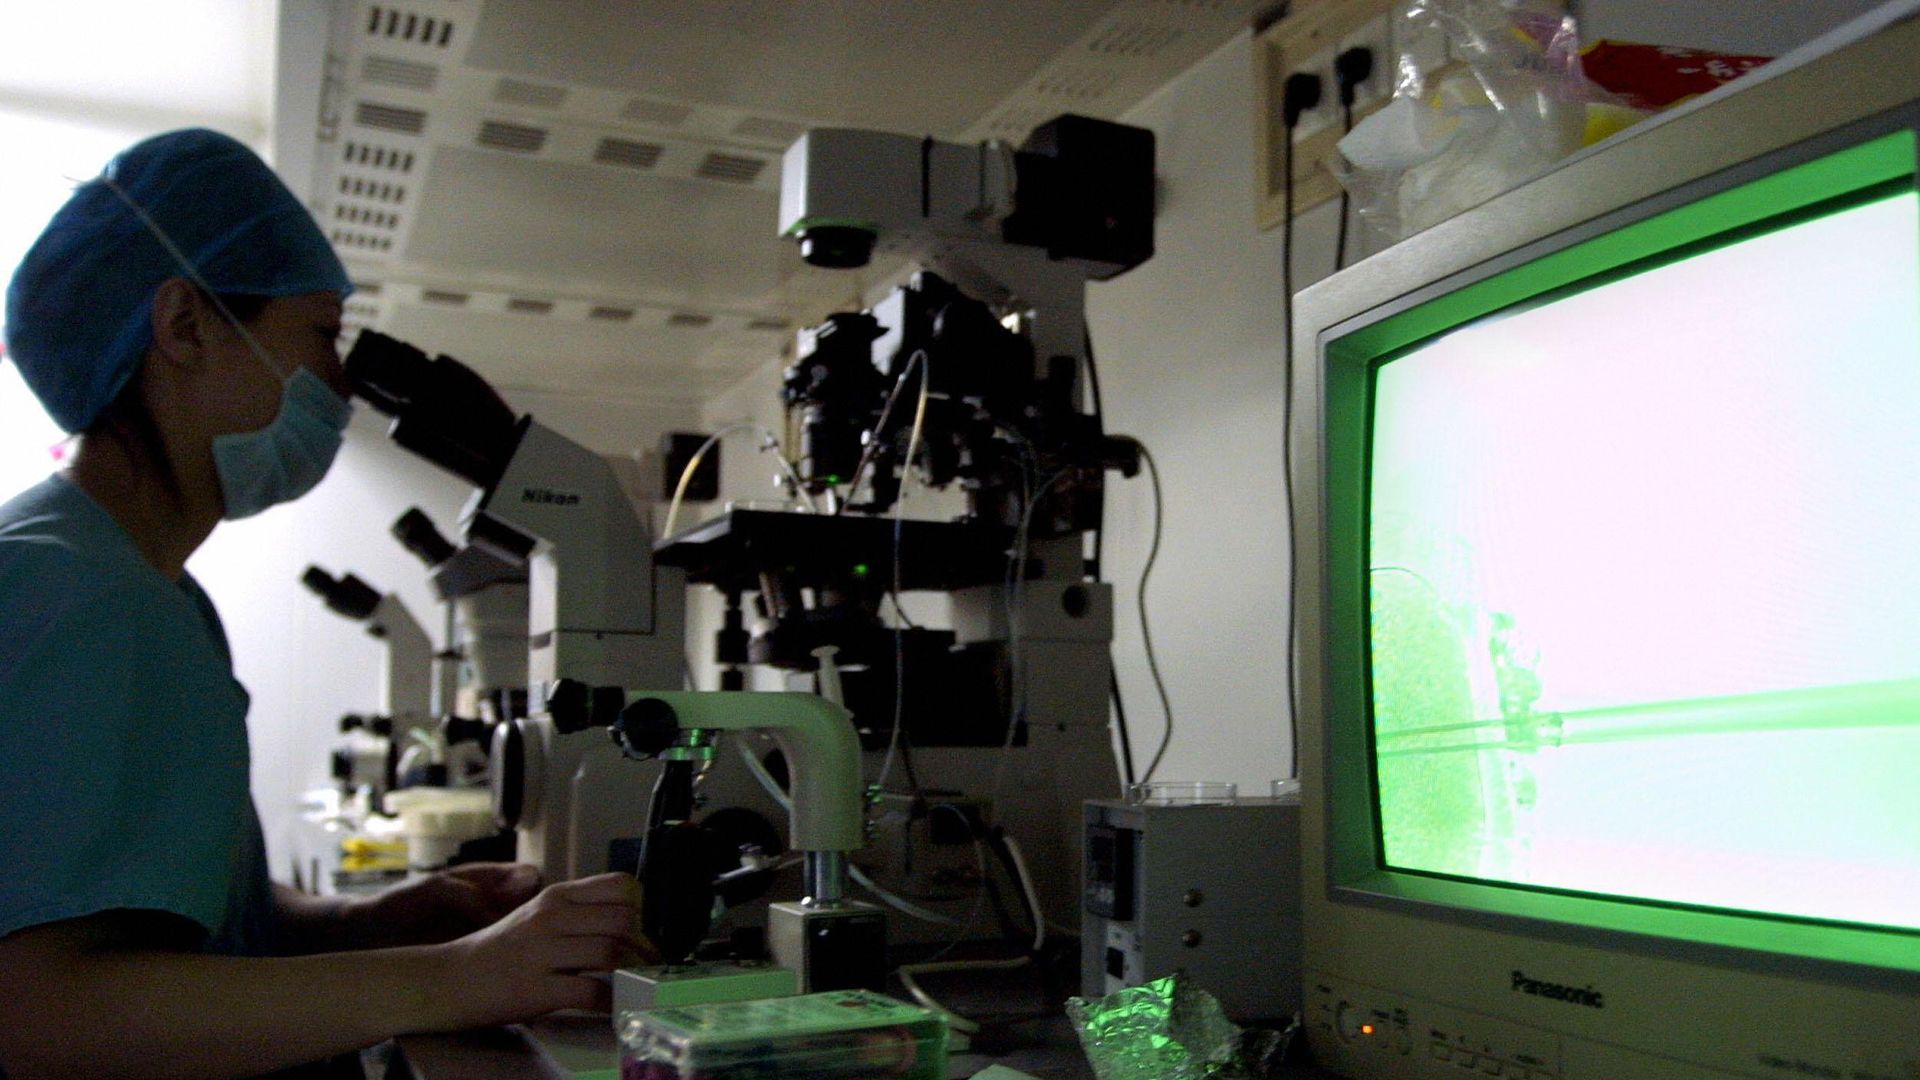 Doctor at Peking University's fertility clinic looking through microscope